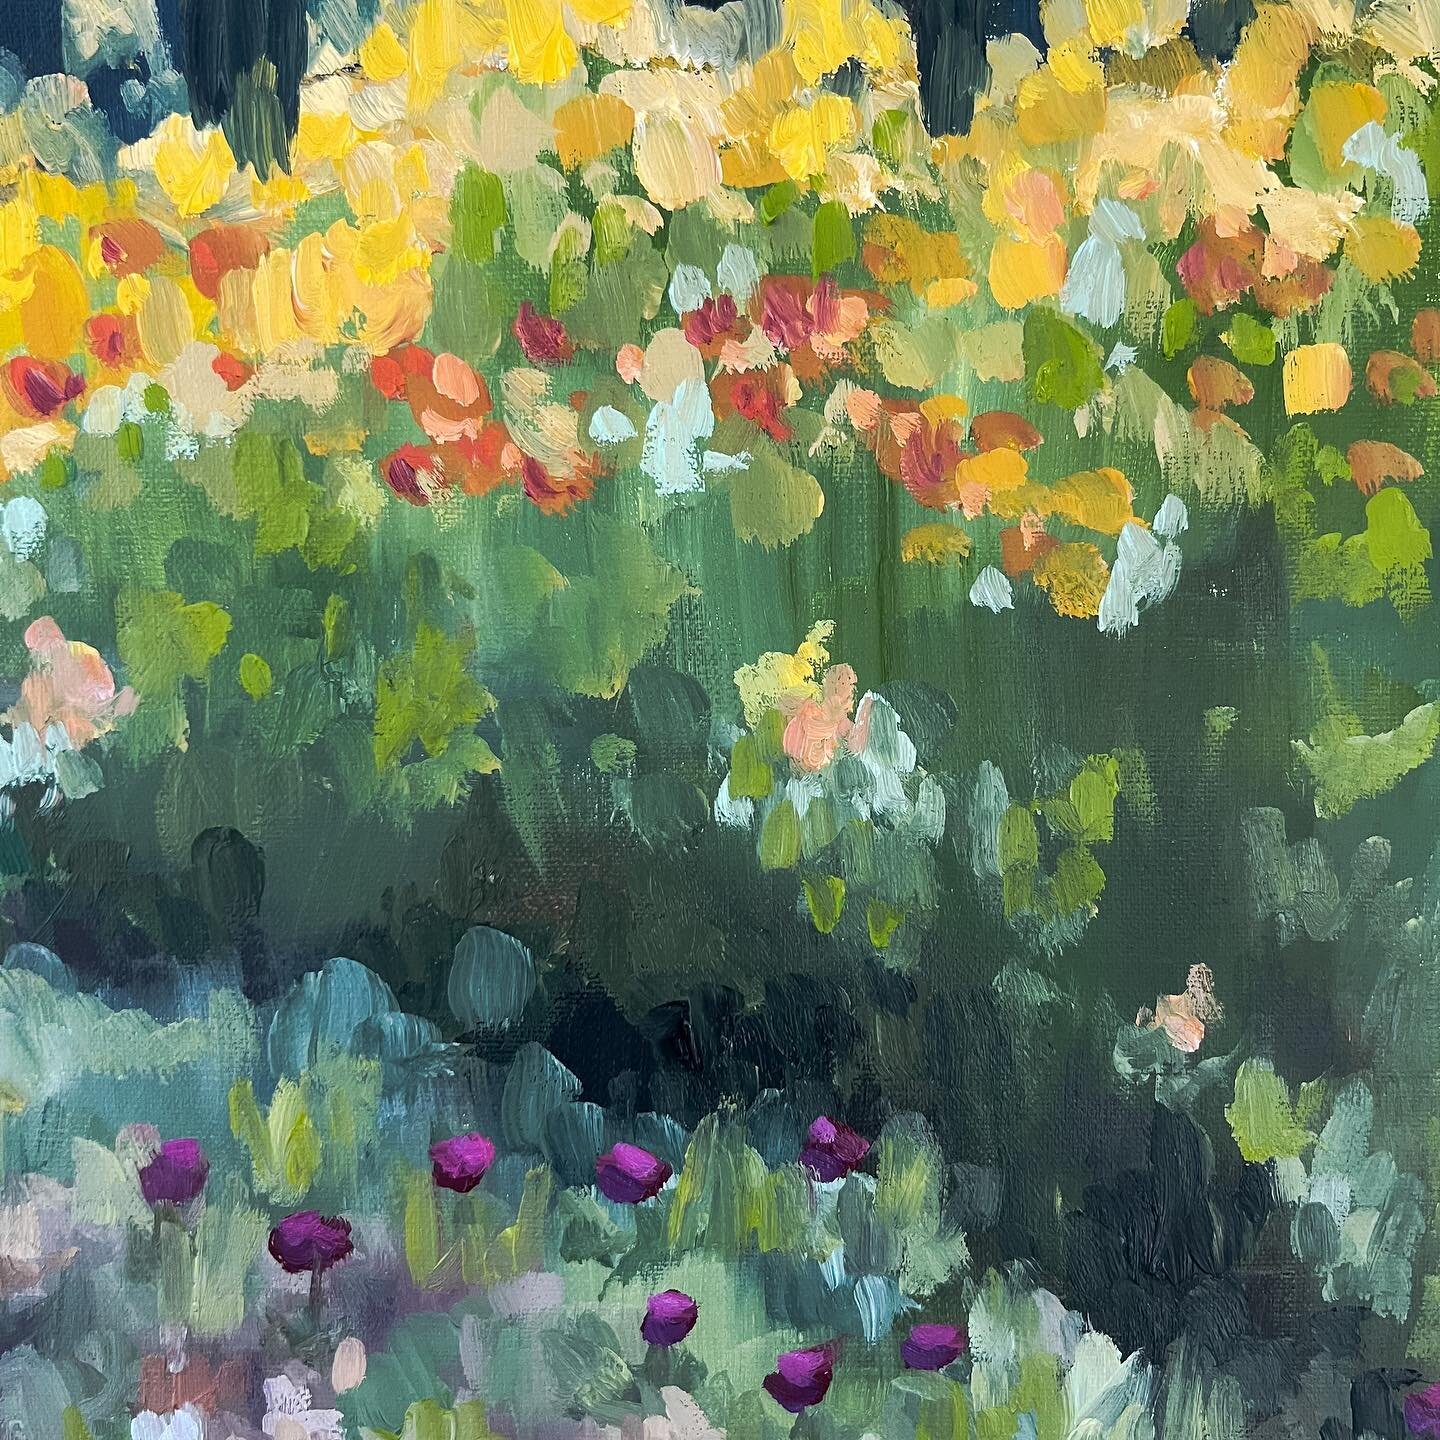 This painting, Fields of Wildflowers, was inspired by just that, the rolling fields of wildflowers along the eastern shores of #ladybirdlake in Austin this spring. 

I've always admired Monet&rsquo;s dreamy brushstrokes and feel like I must have been